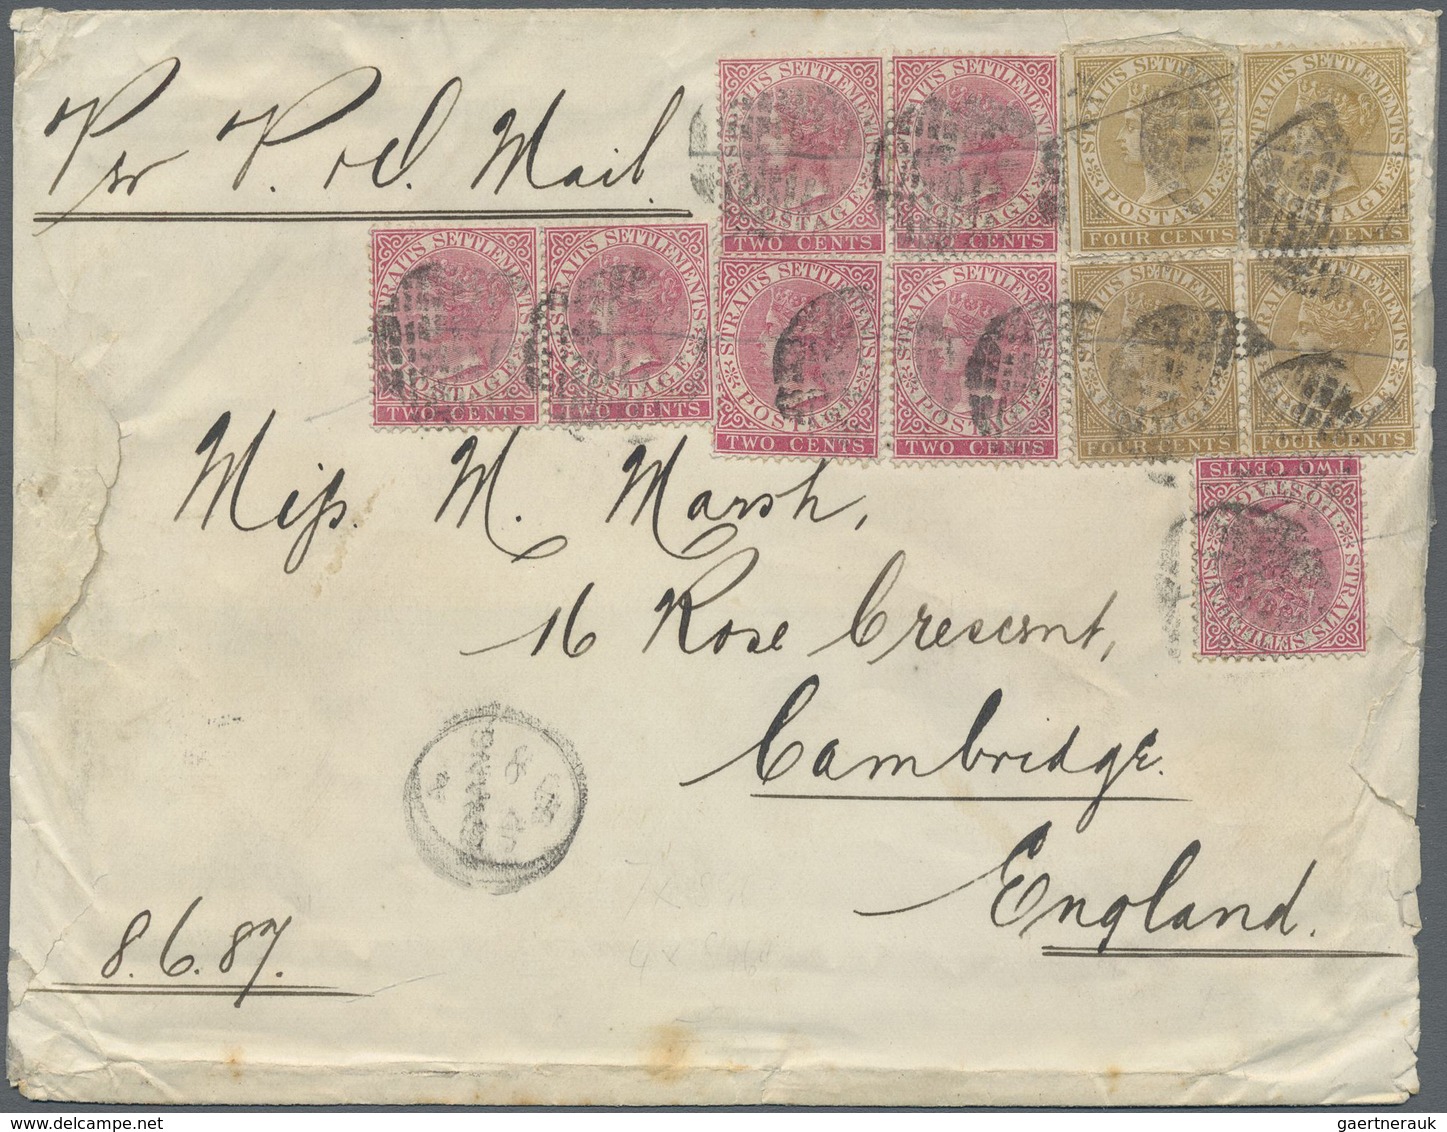 Br Malaiische Staaten - Penang: 1887 Triple-weight Cover From Penang To England 'Per Parcel Mail', Fran - Penang